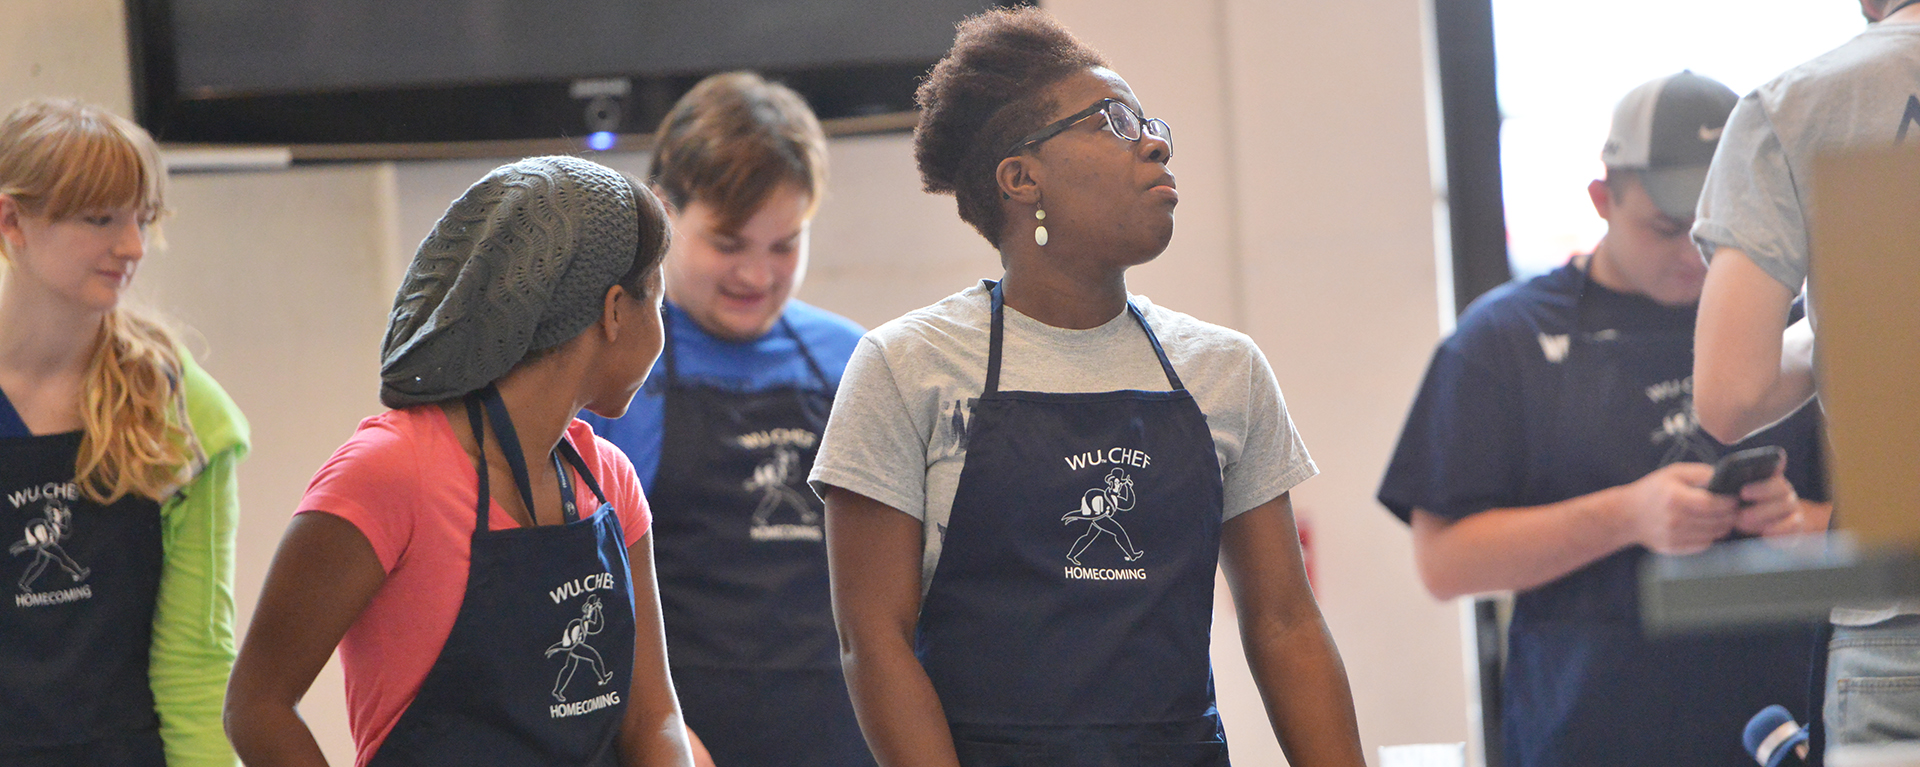 Washburn students participate in the WU Chef event held annually during Homecoming Week.